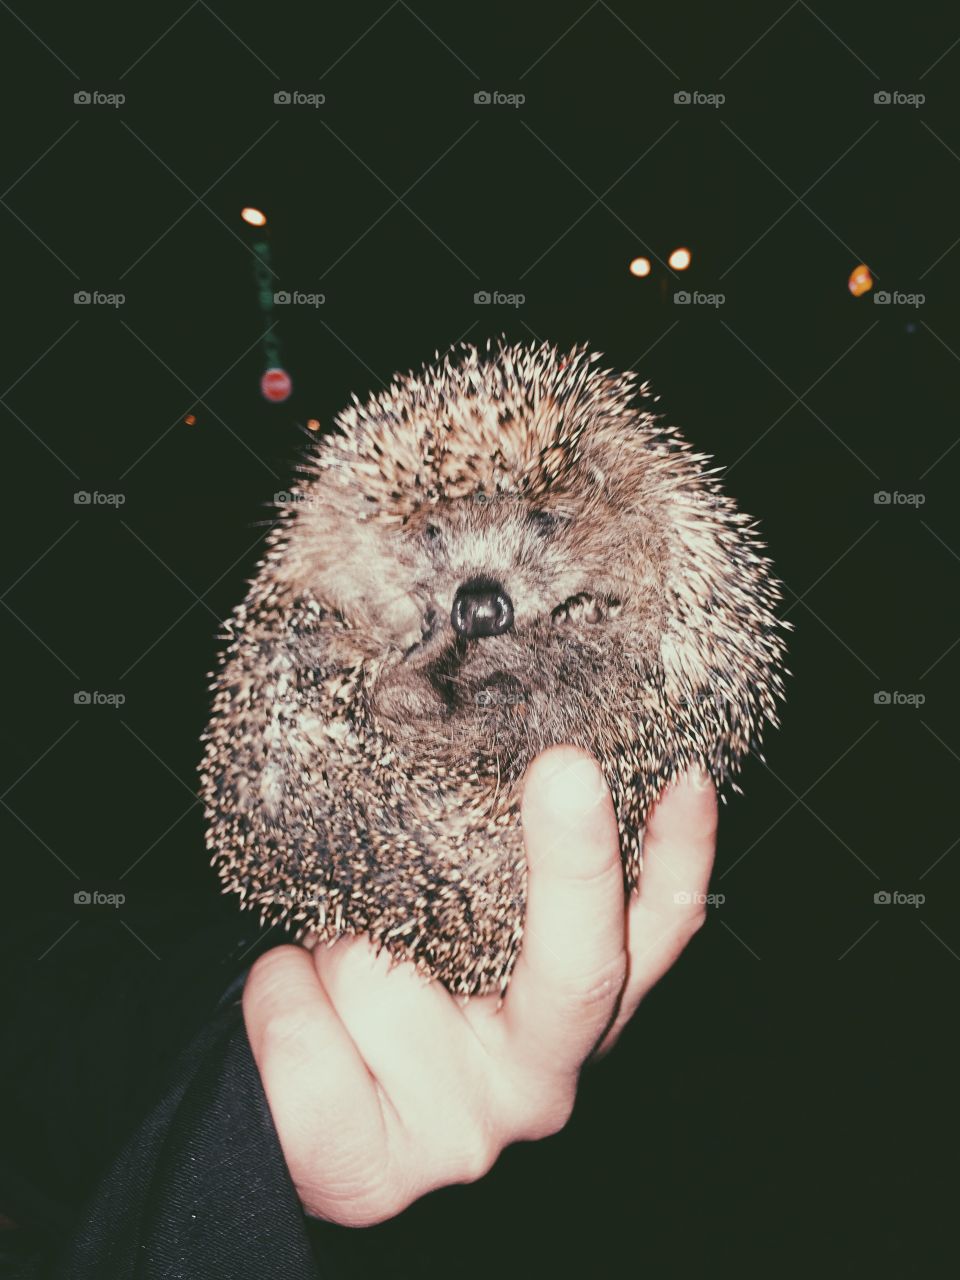 Little hedgehog. Little hedgehog which I meet during the walk at night